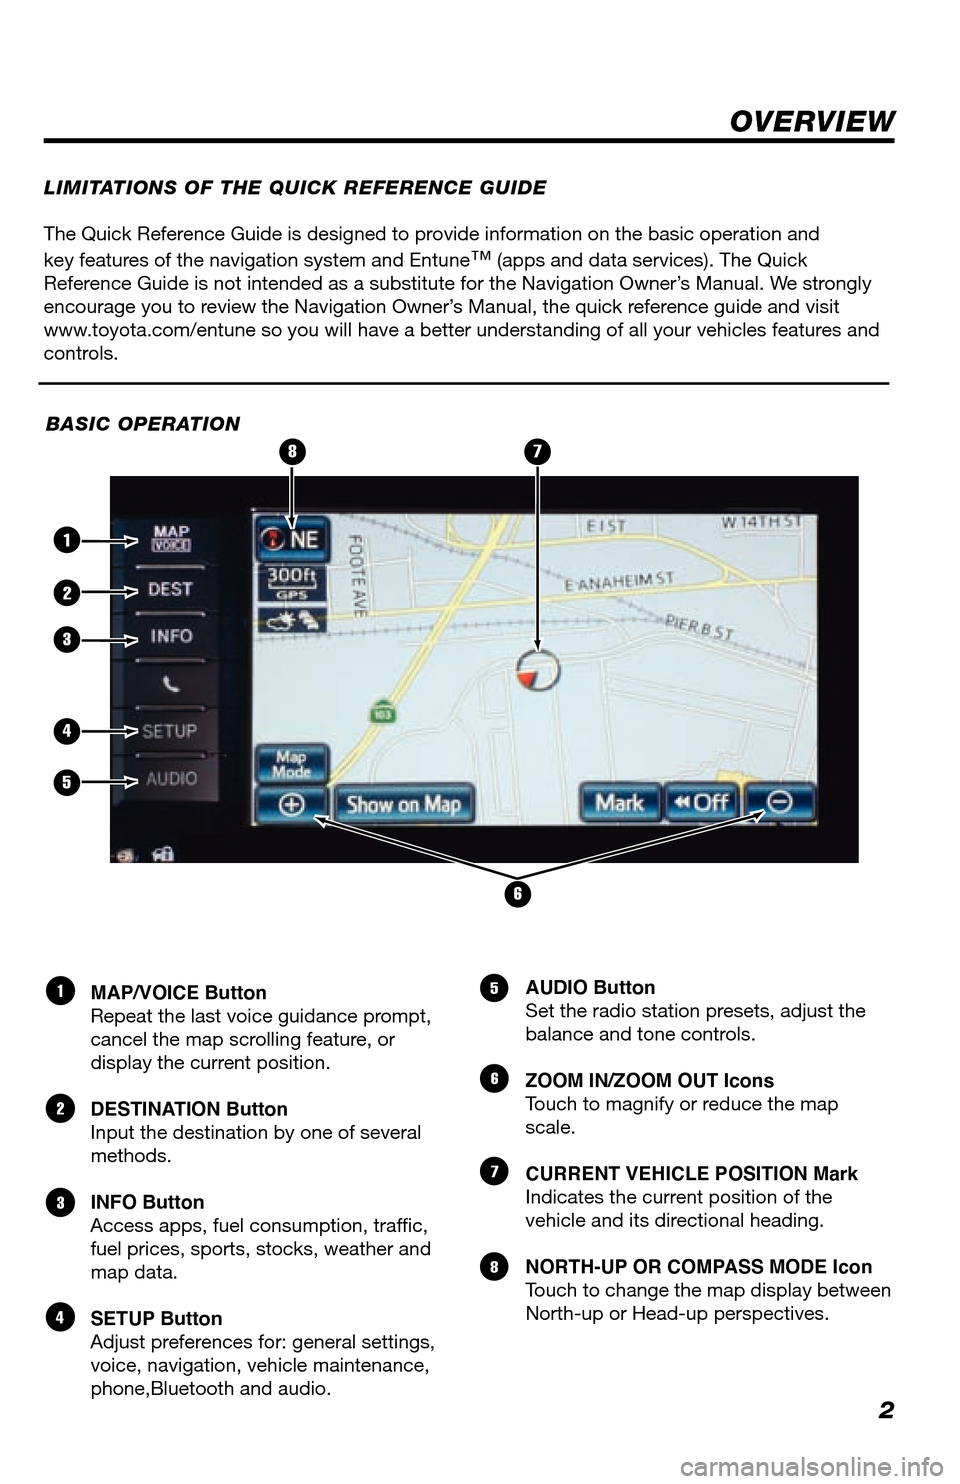 TOYOTA LAND CRUISER 2013 J200 Navigation Manual 2
The Quick Reference Guide is designed to provide information on the basic operation and 
key features of the navigation system and Entune
™ (apps and data services). The Quick 
Reference Guide is 